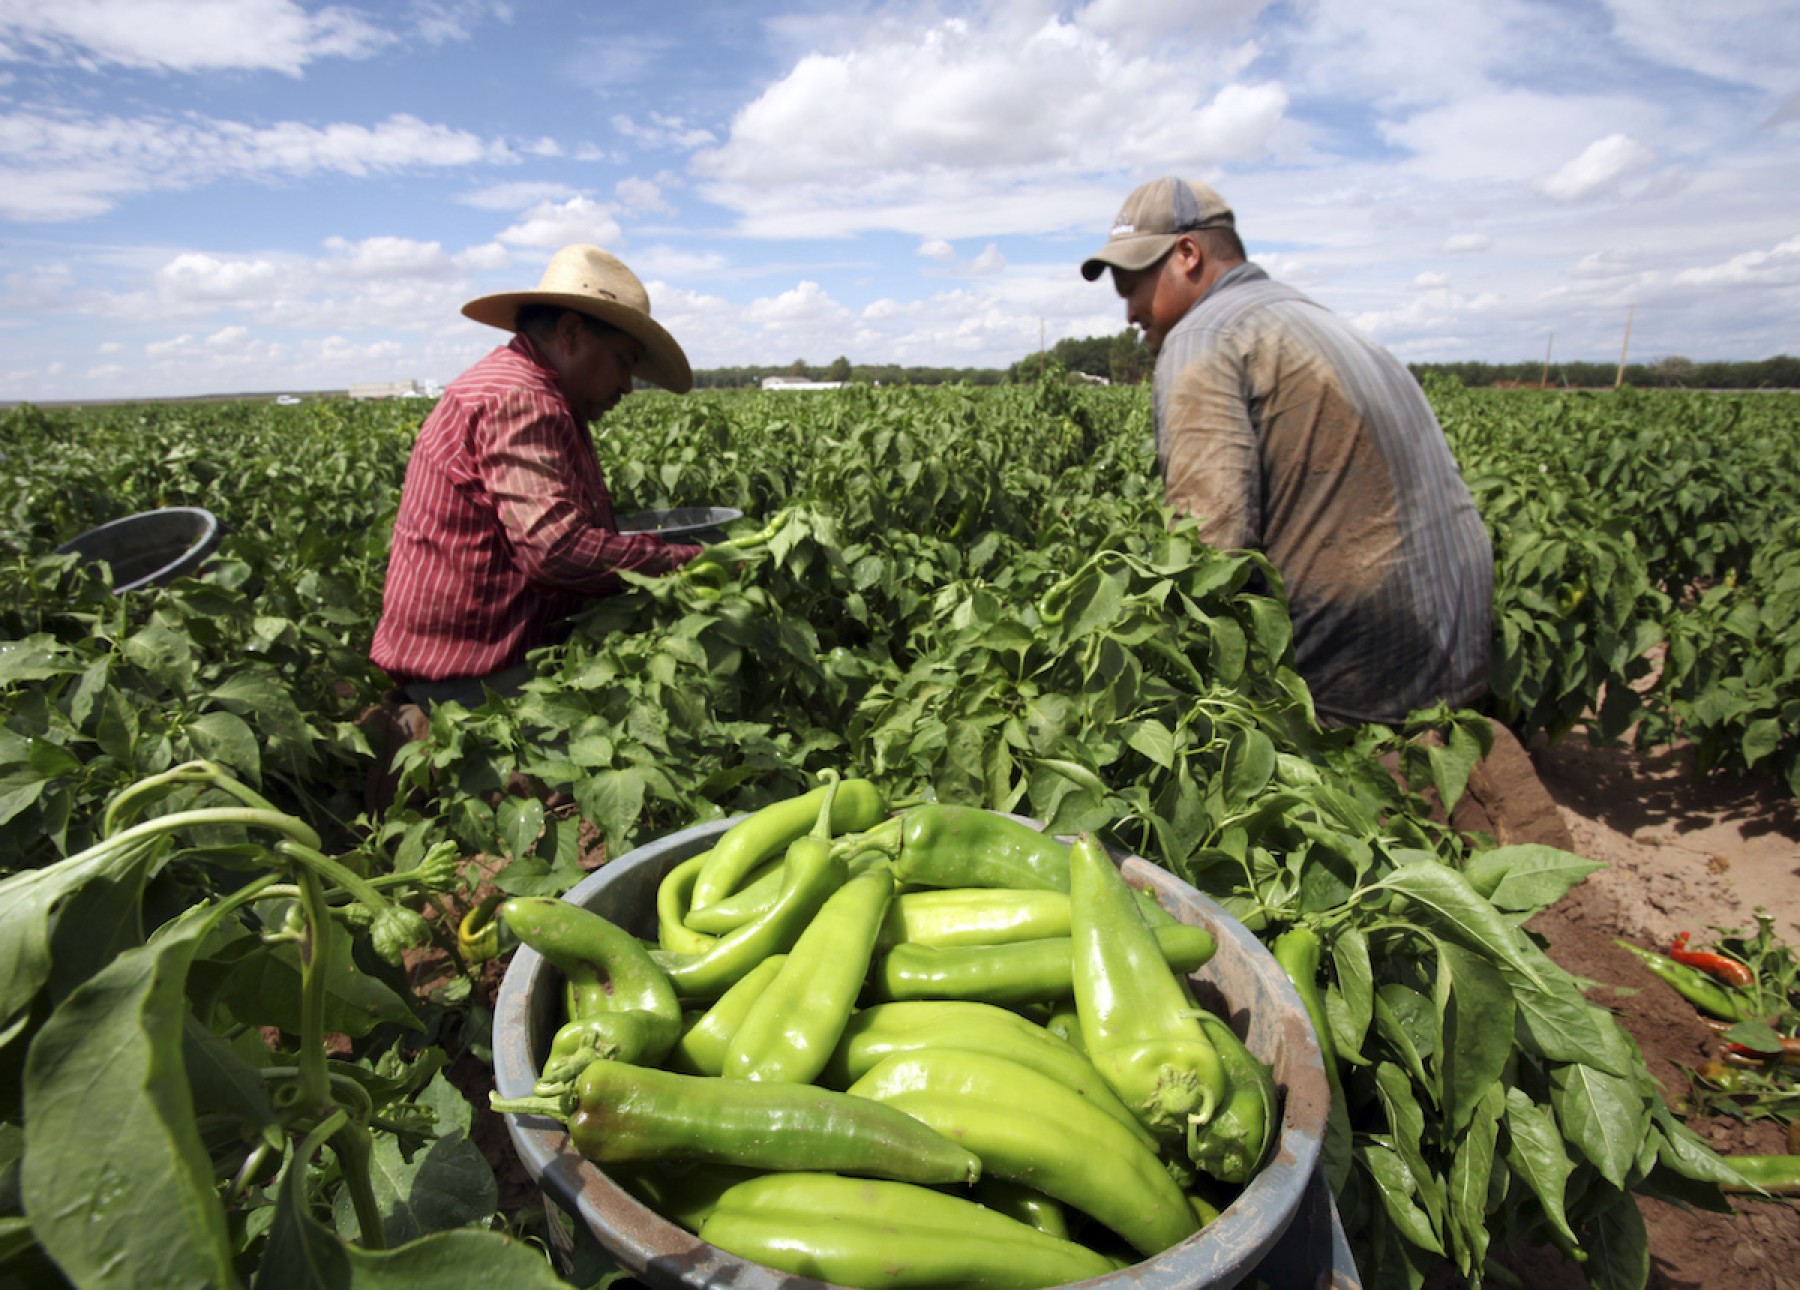 Restrictions on Mexican agricultural products could lead to a trade war with the United States